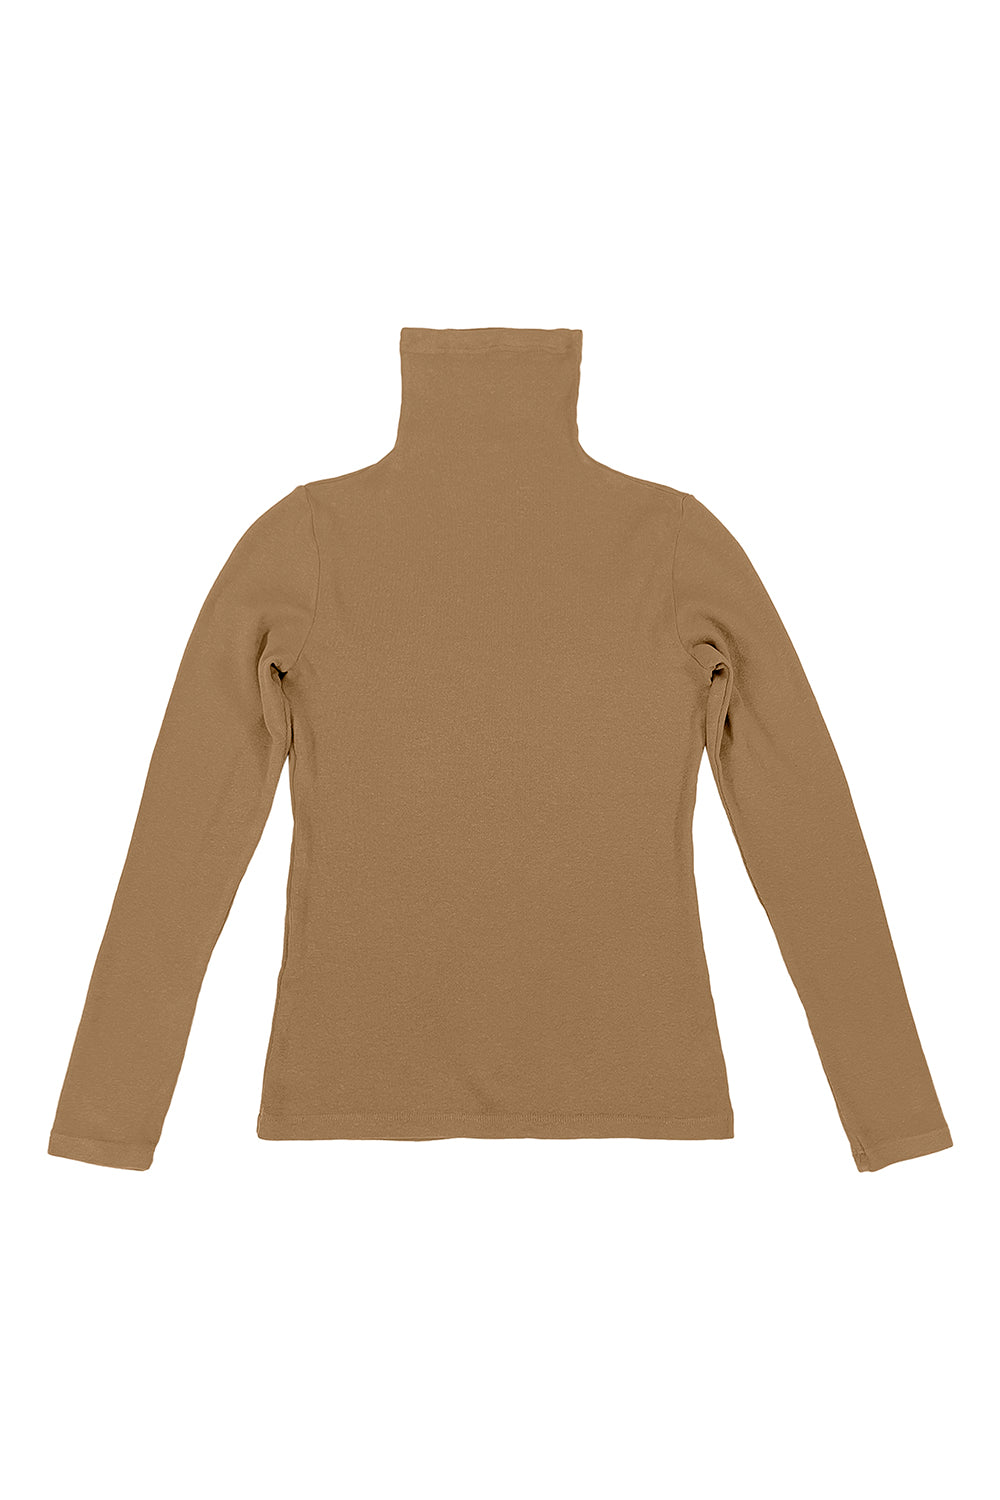 Whidbey Turtleneck | Jungmaven Hemp Clothing & Accessories / Color: Coyote